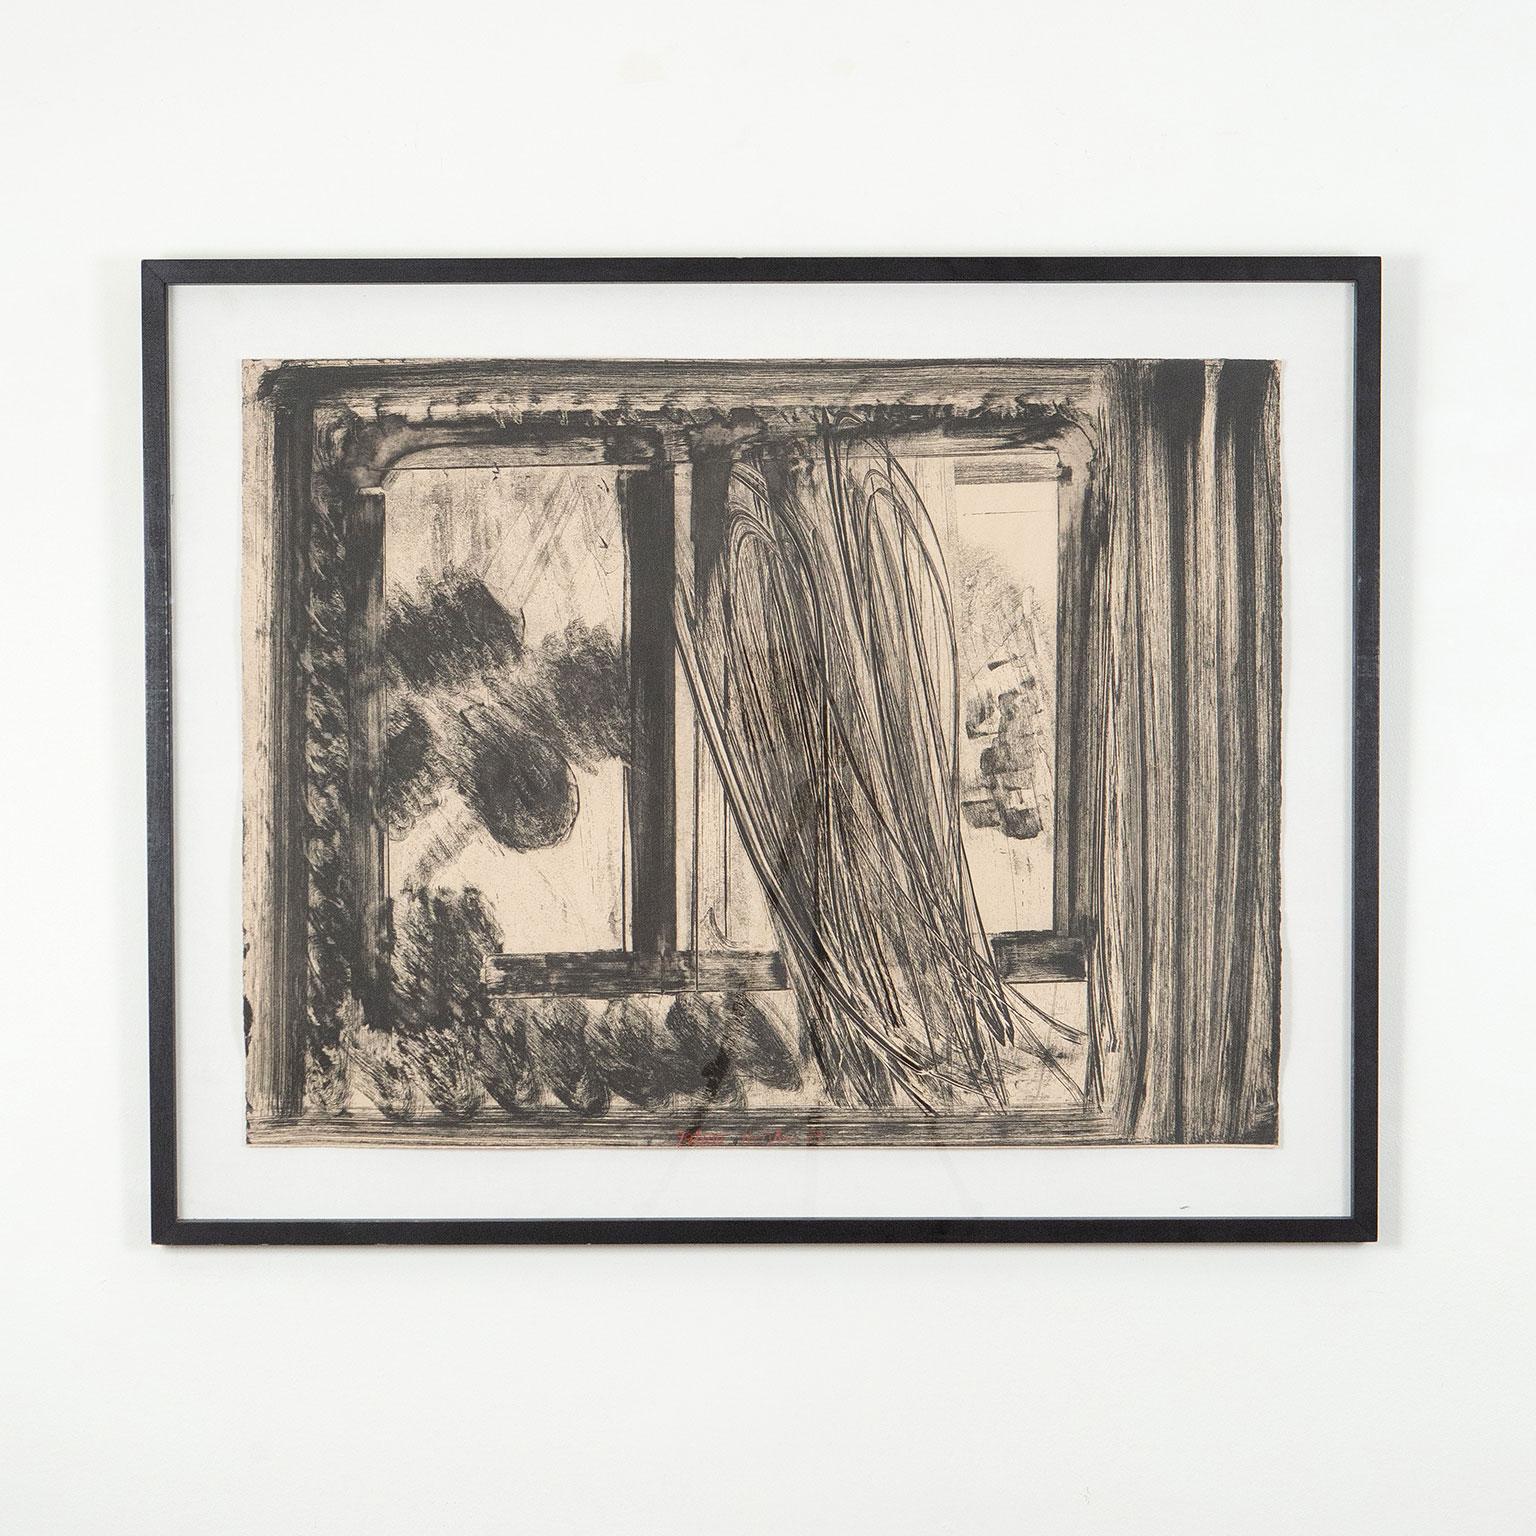 Late Afternoon in the Museum of Art, Etching, 1979 - Print by Howard Hodgkin